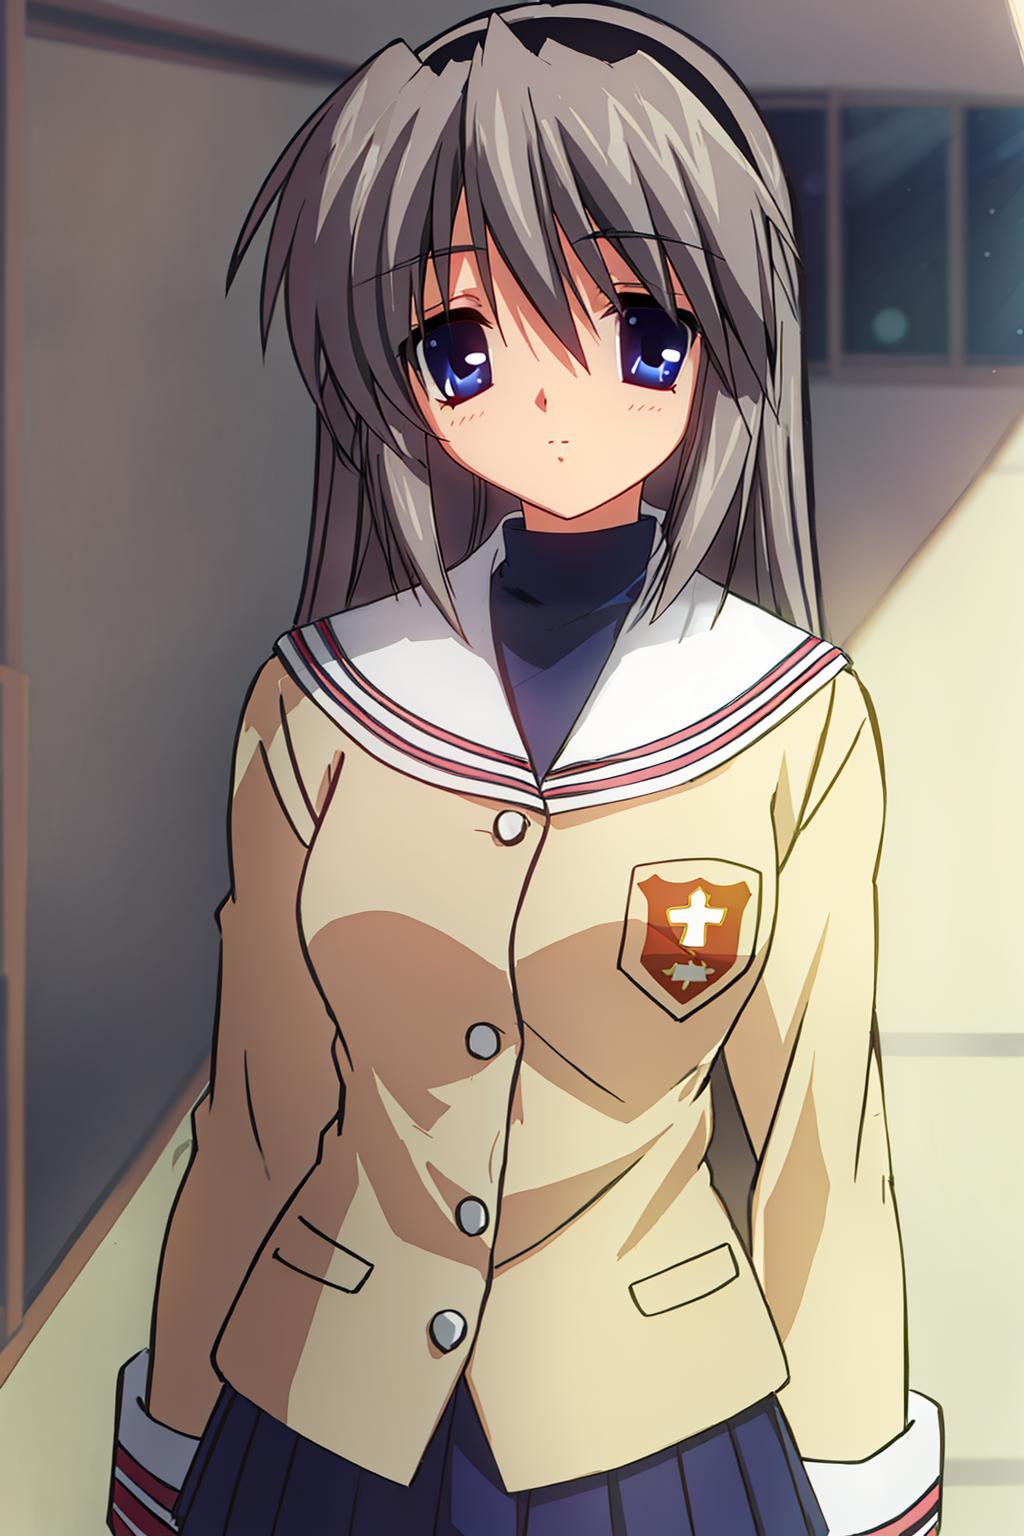 Anime. - anime:clannad / clannad after story Genres: Comedy, Drama, anime  clannad after story - thirstymag.com